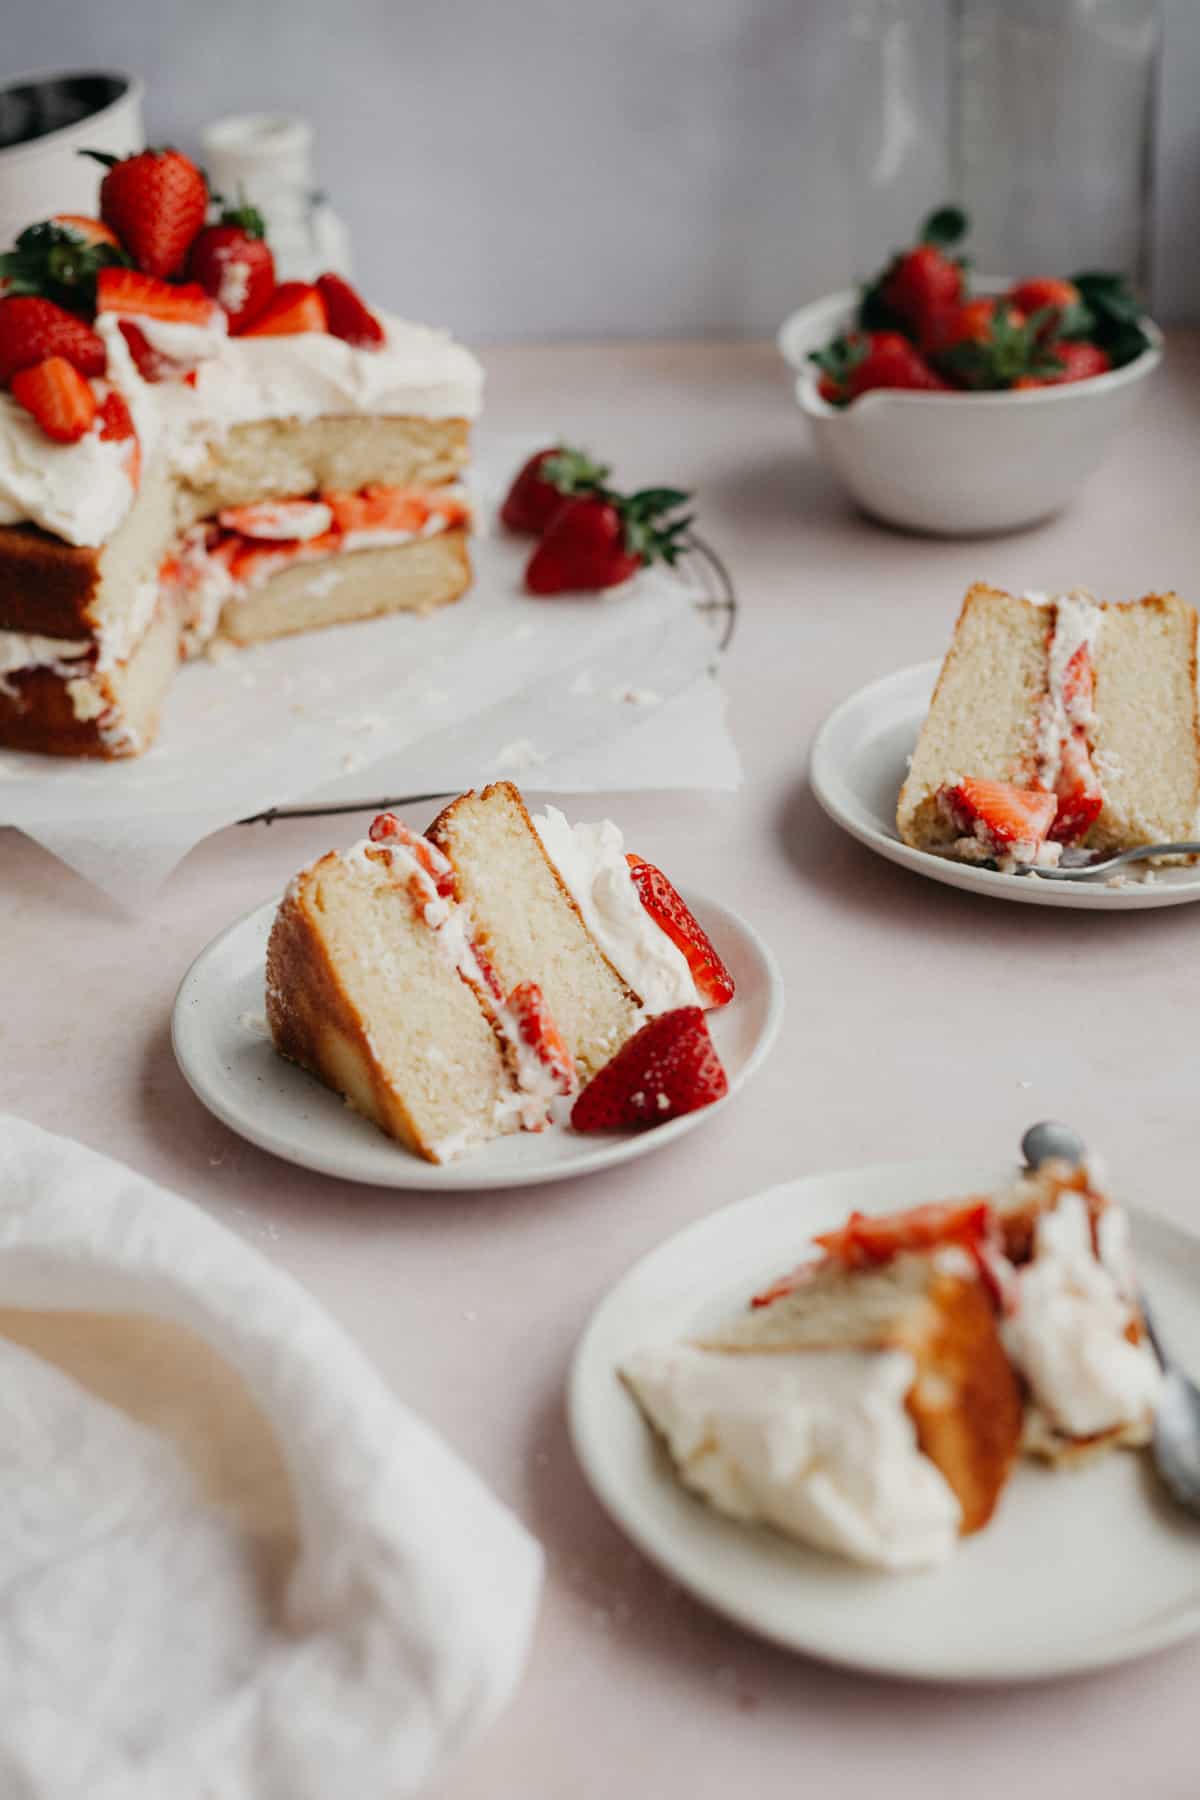 Three slices of white cake with strawberry filling on small beige plates.